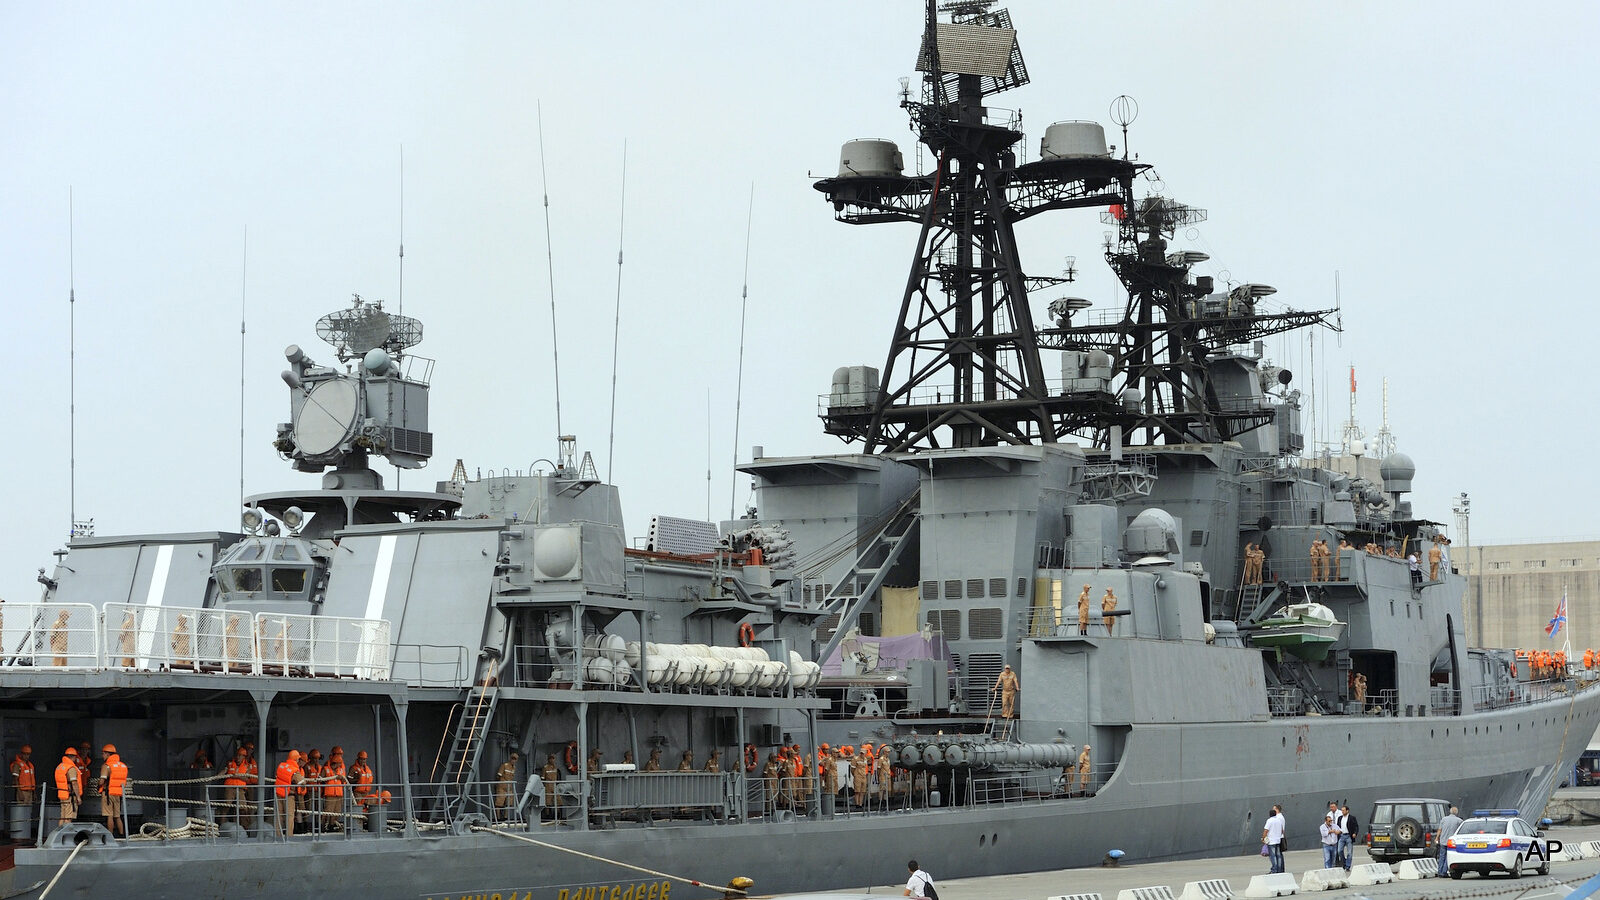 Russian sailors are seen aboard the Admiral Panteleyev Russian war ship moored at the Cypriot port of Limassol.